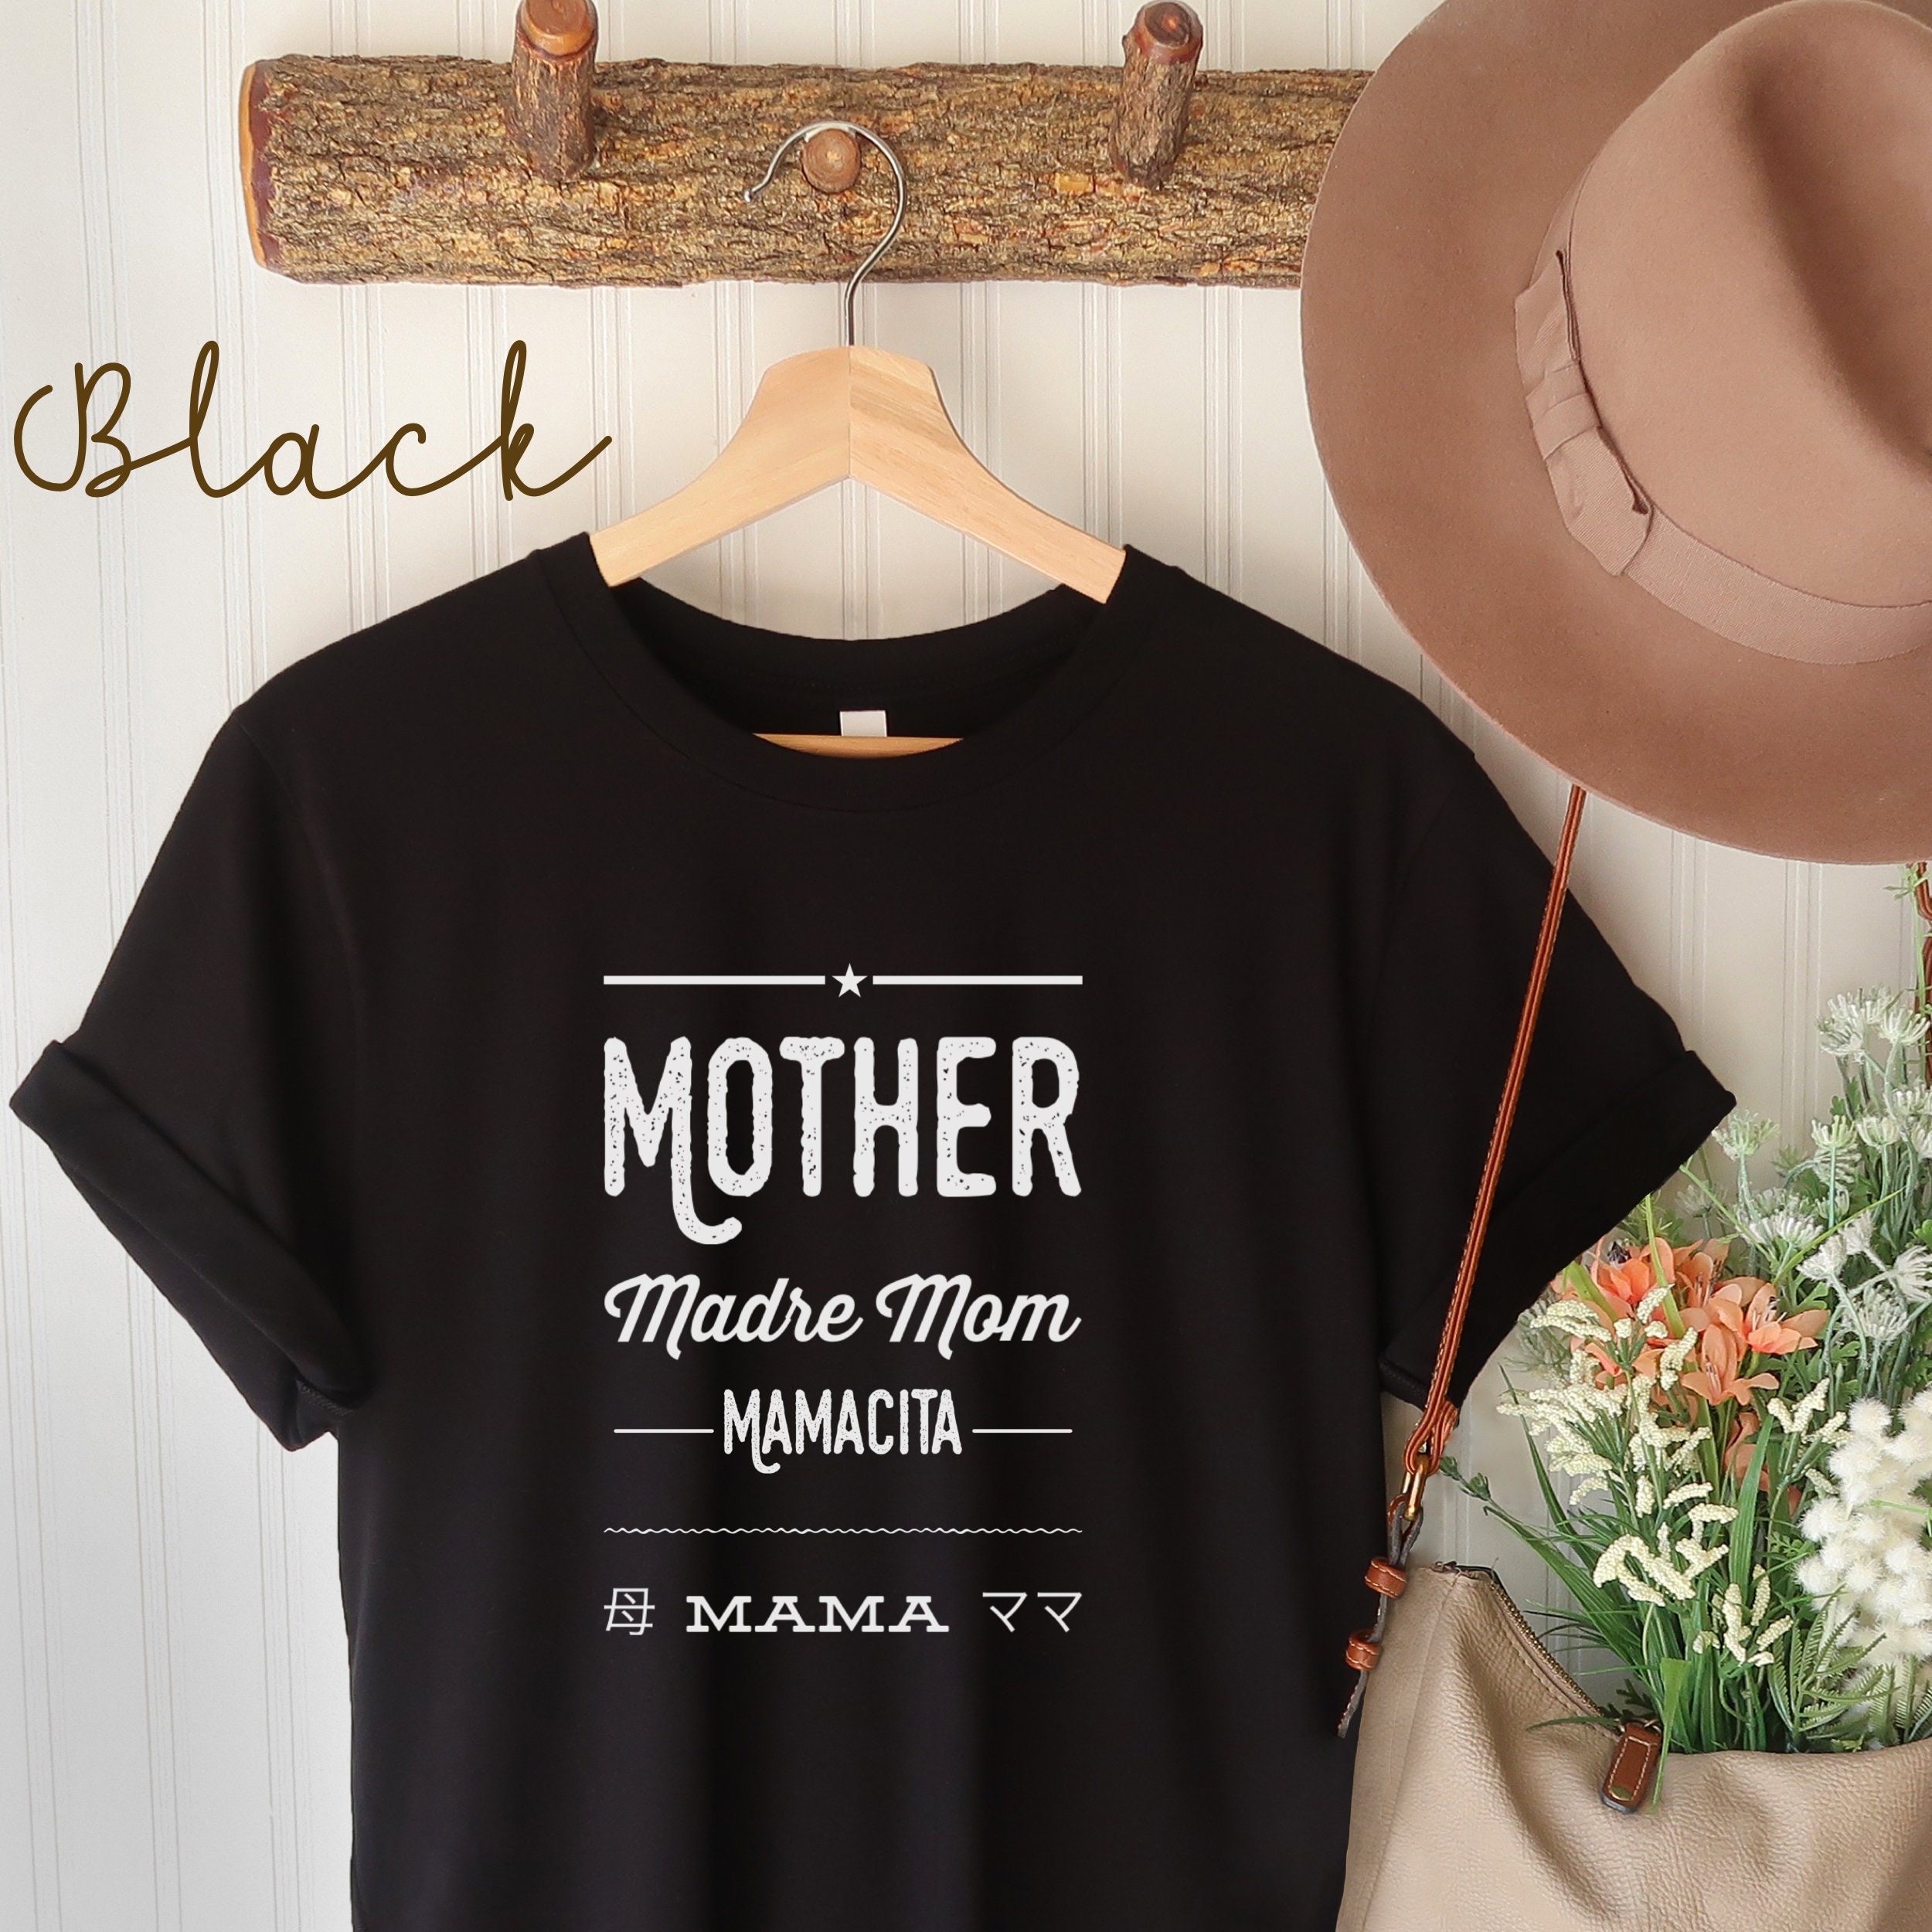 Mother Mama Madre Mom Haha Shirt/mother in | Etsy